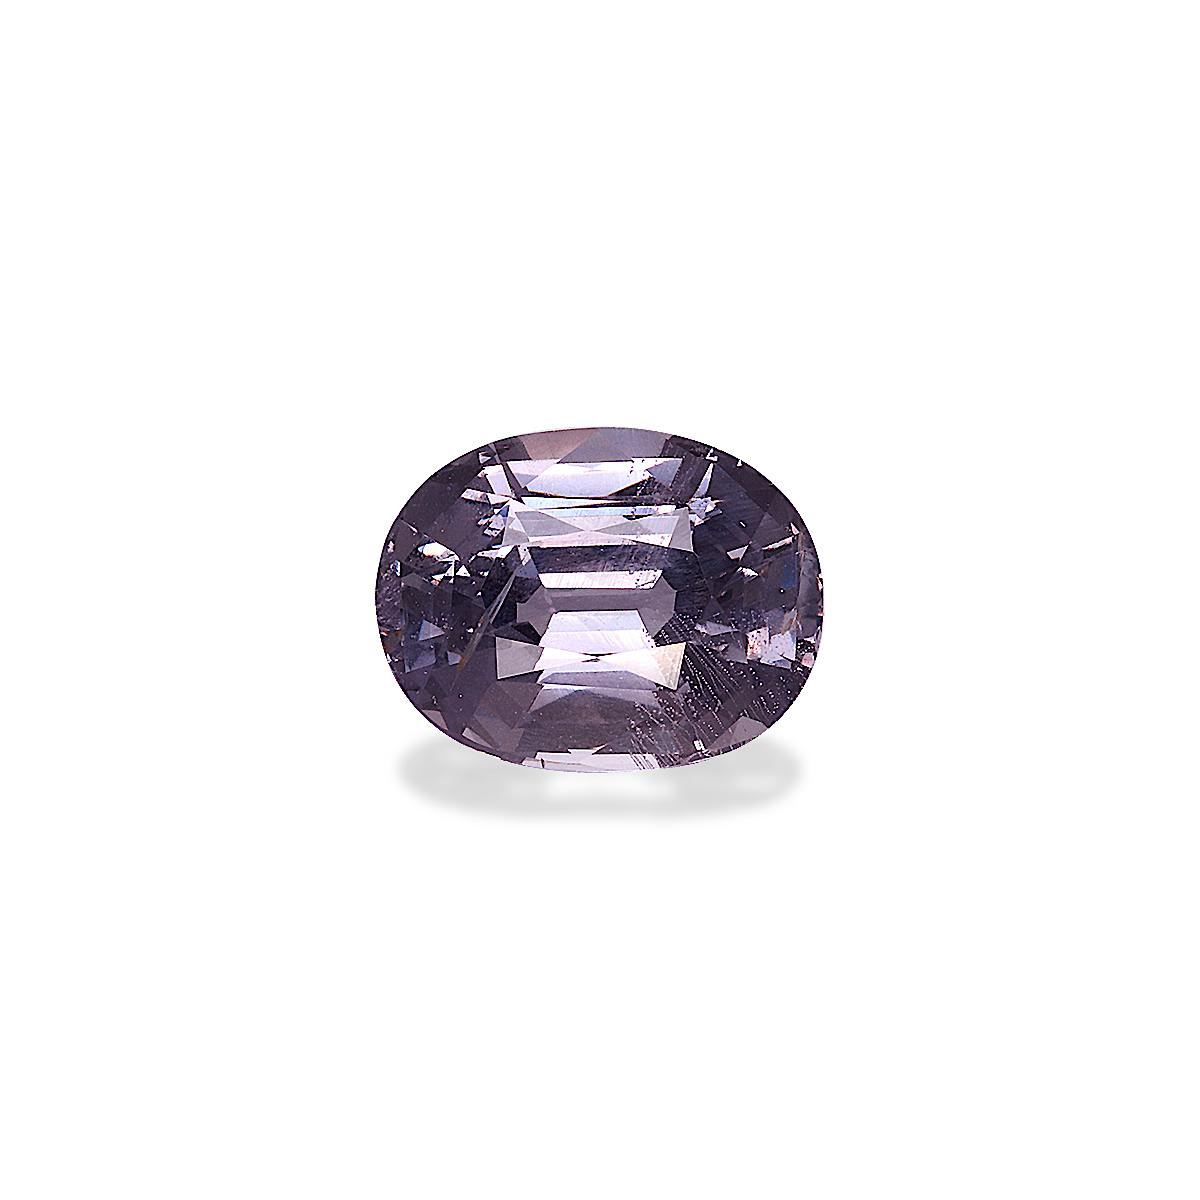 Grey Spinel 3.22ct - Main Image